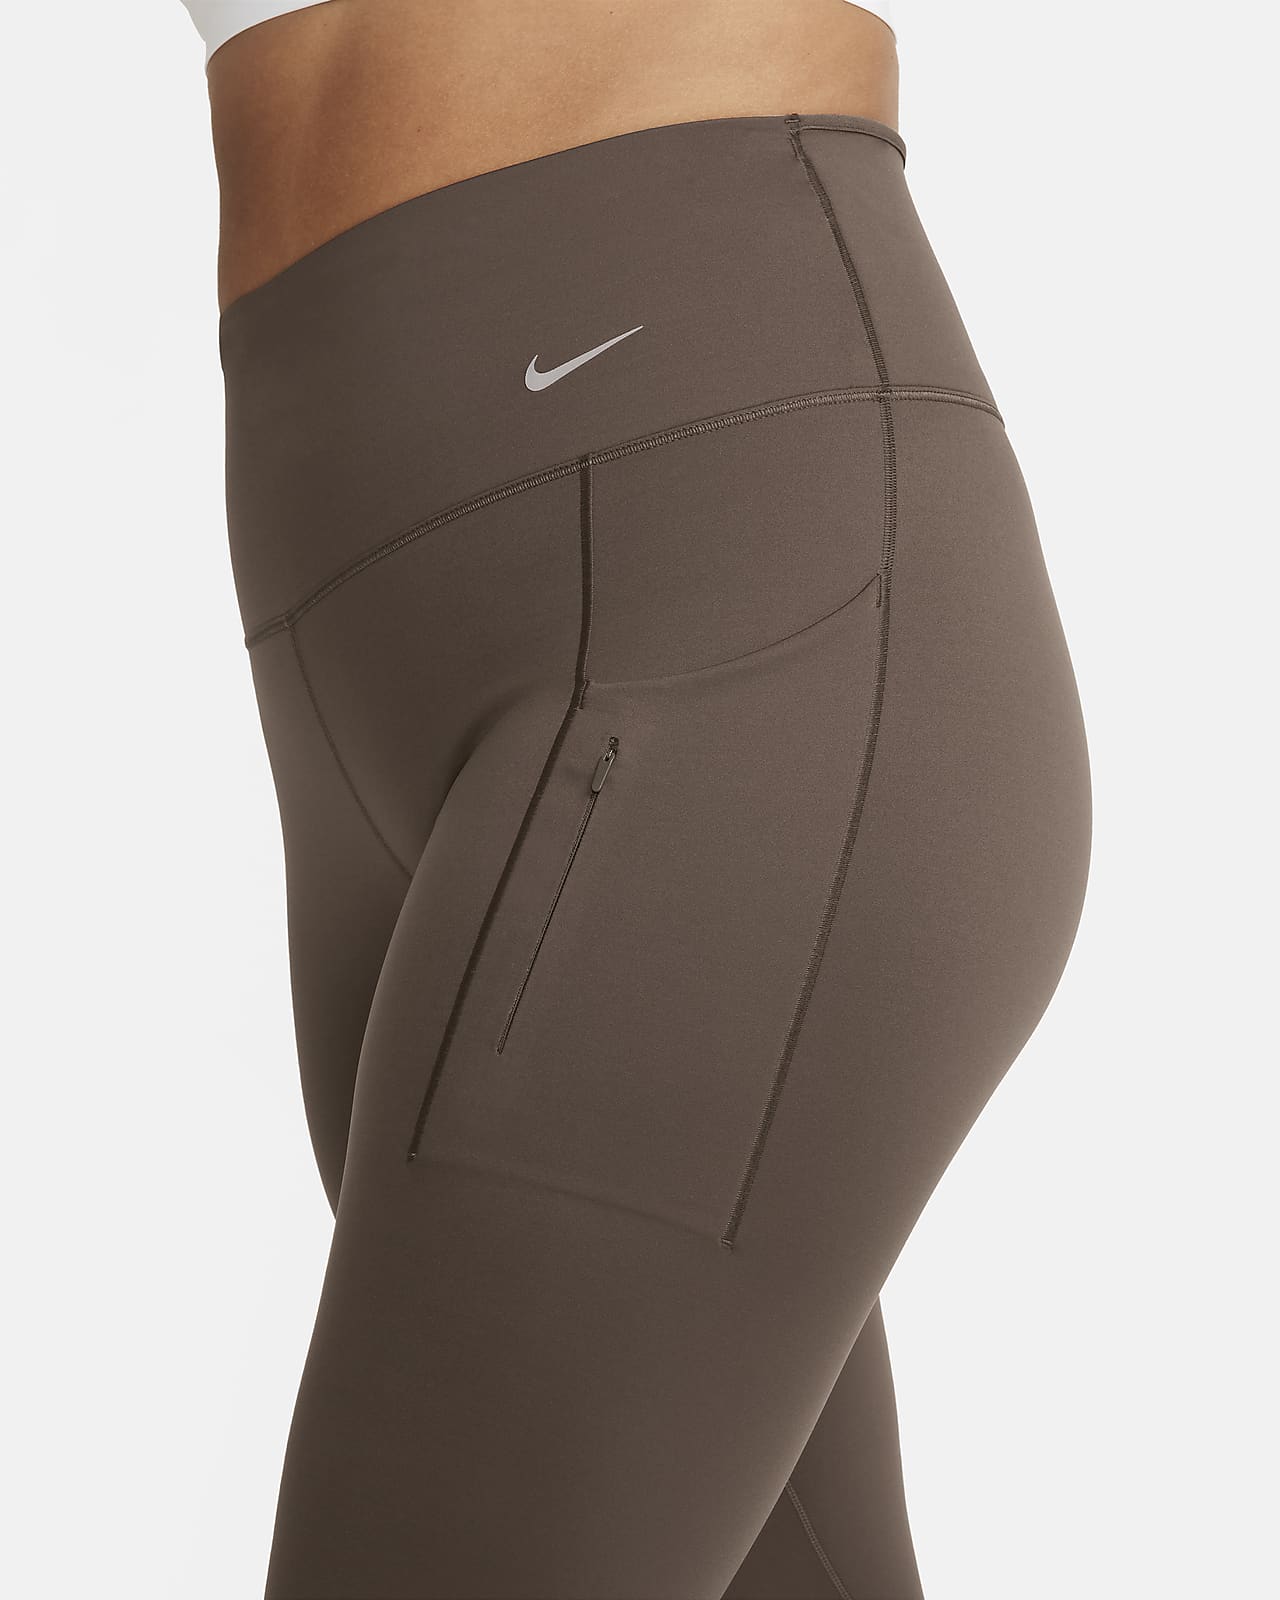 Nike One Dri-Fit Traning Full Length Firming Women's Sports Tights